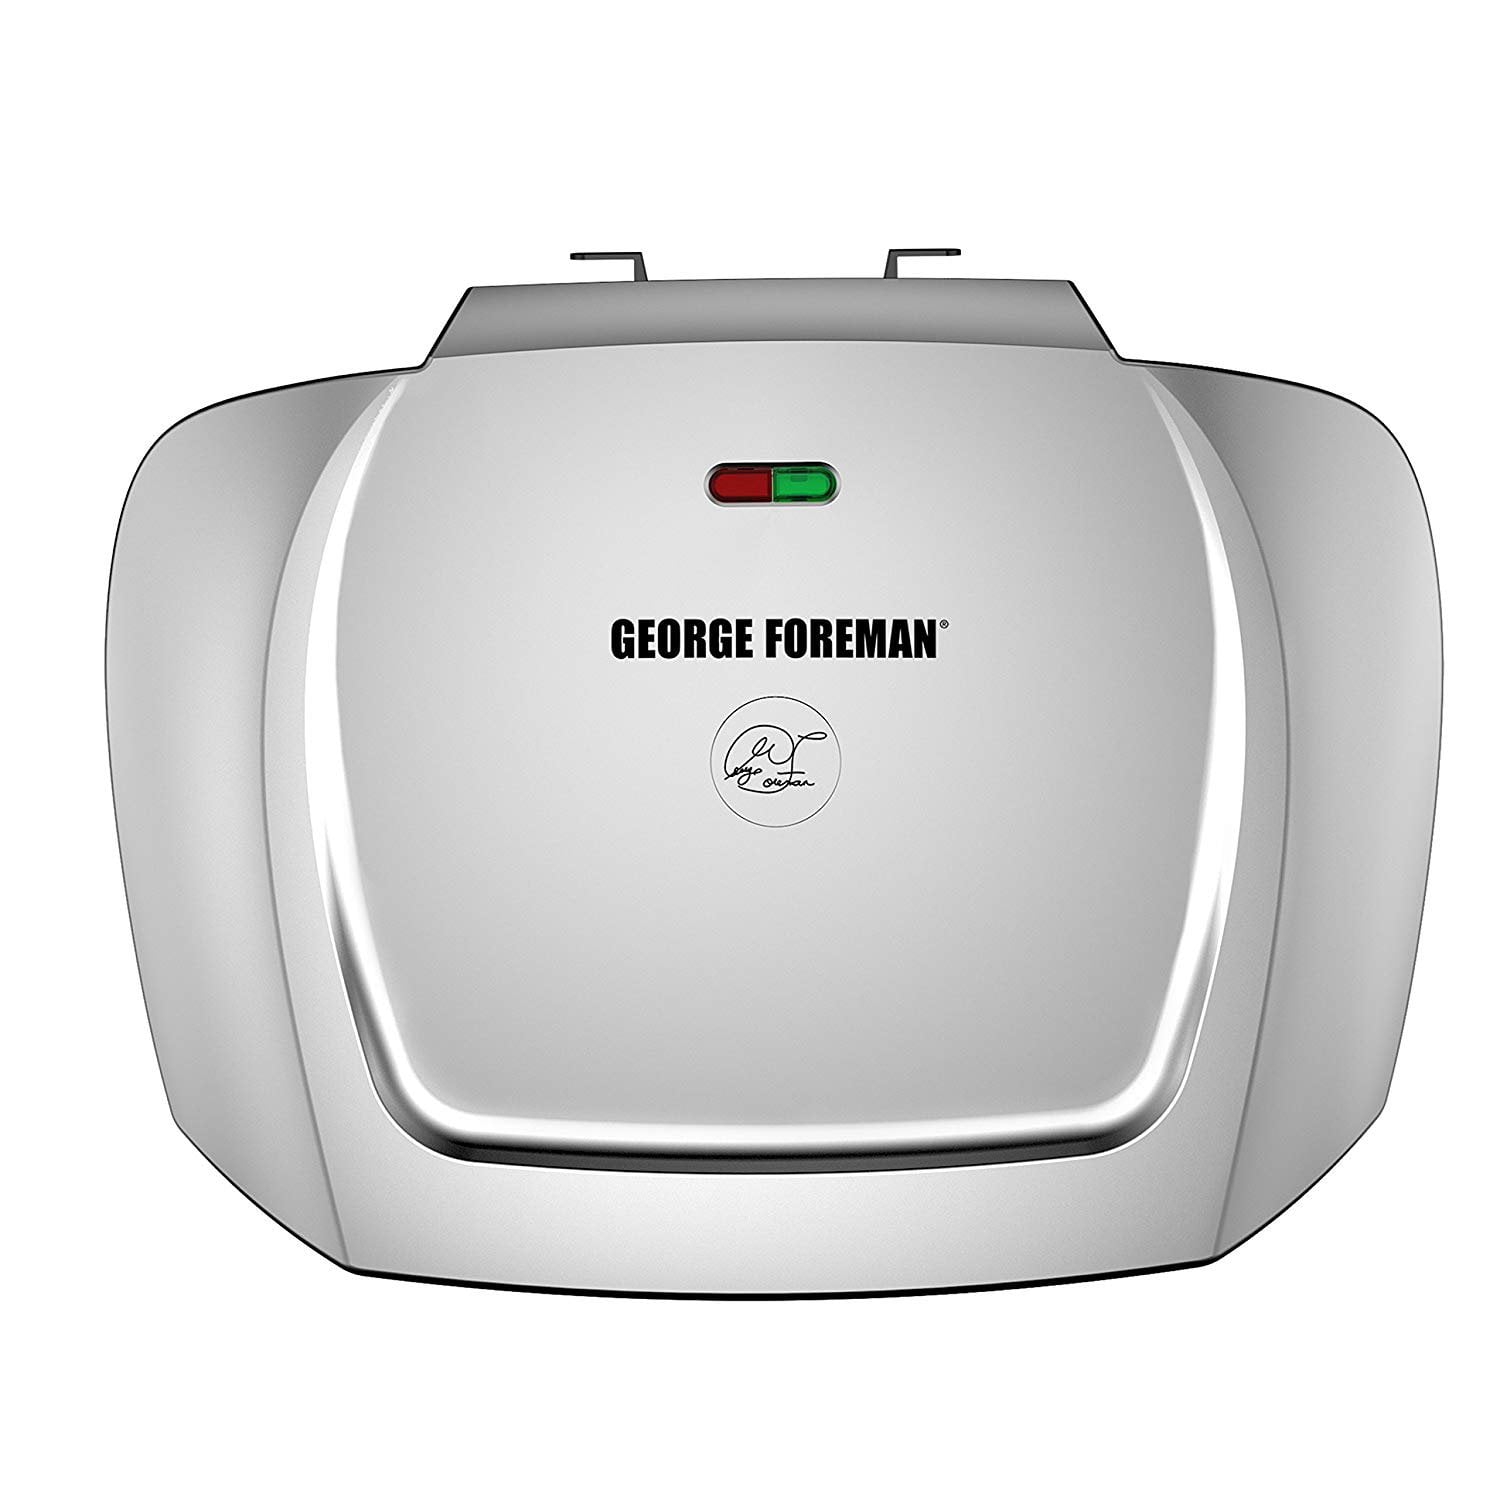 George Foreman GR144 144-Square-Inch Nonstick Family-Size Grill Review 